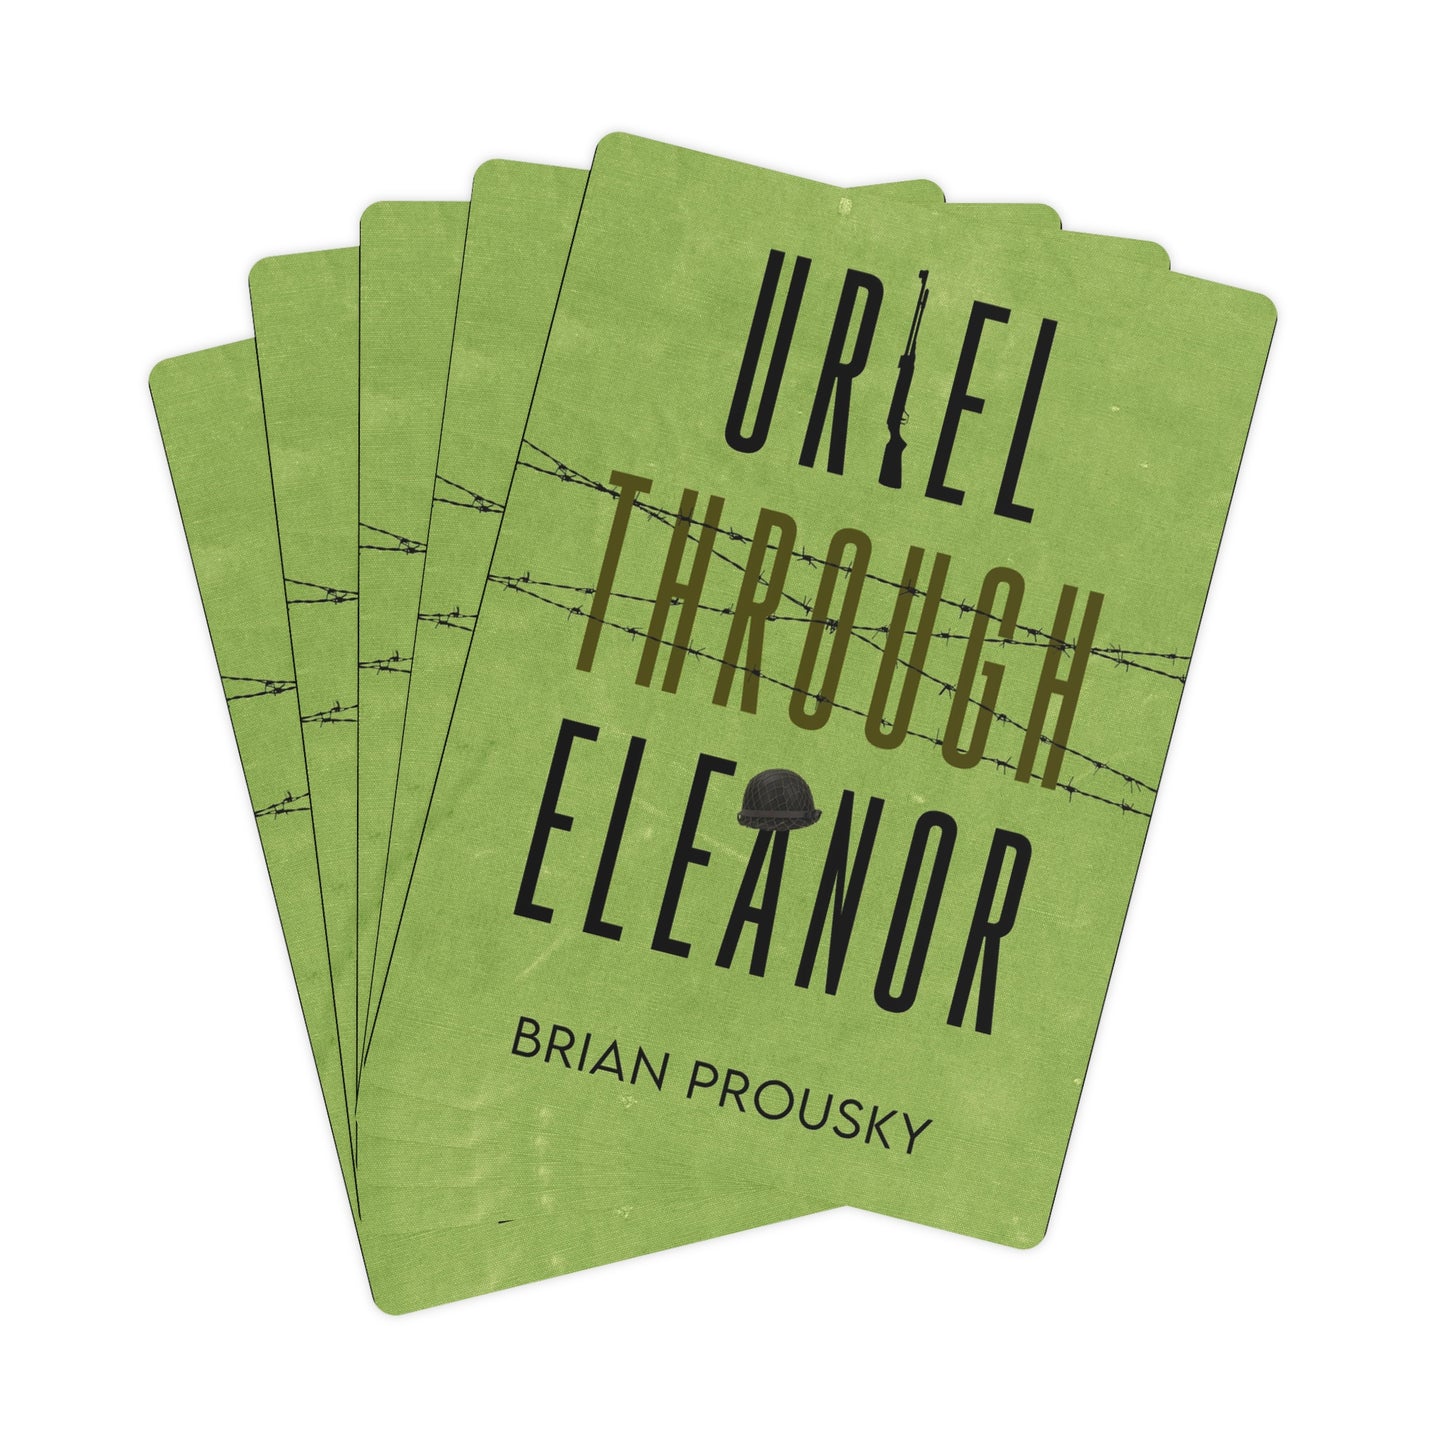 Uriel Through Eleanor - Playing Cards